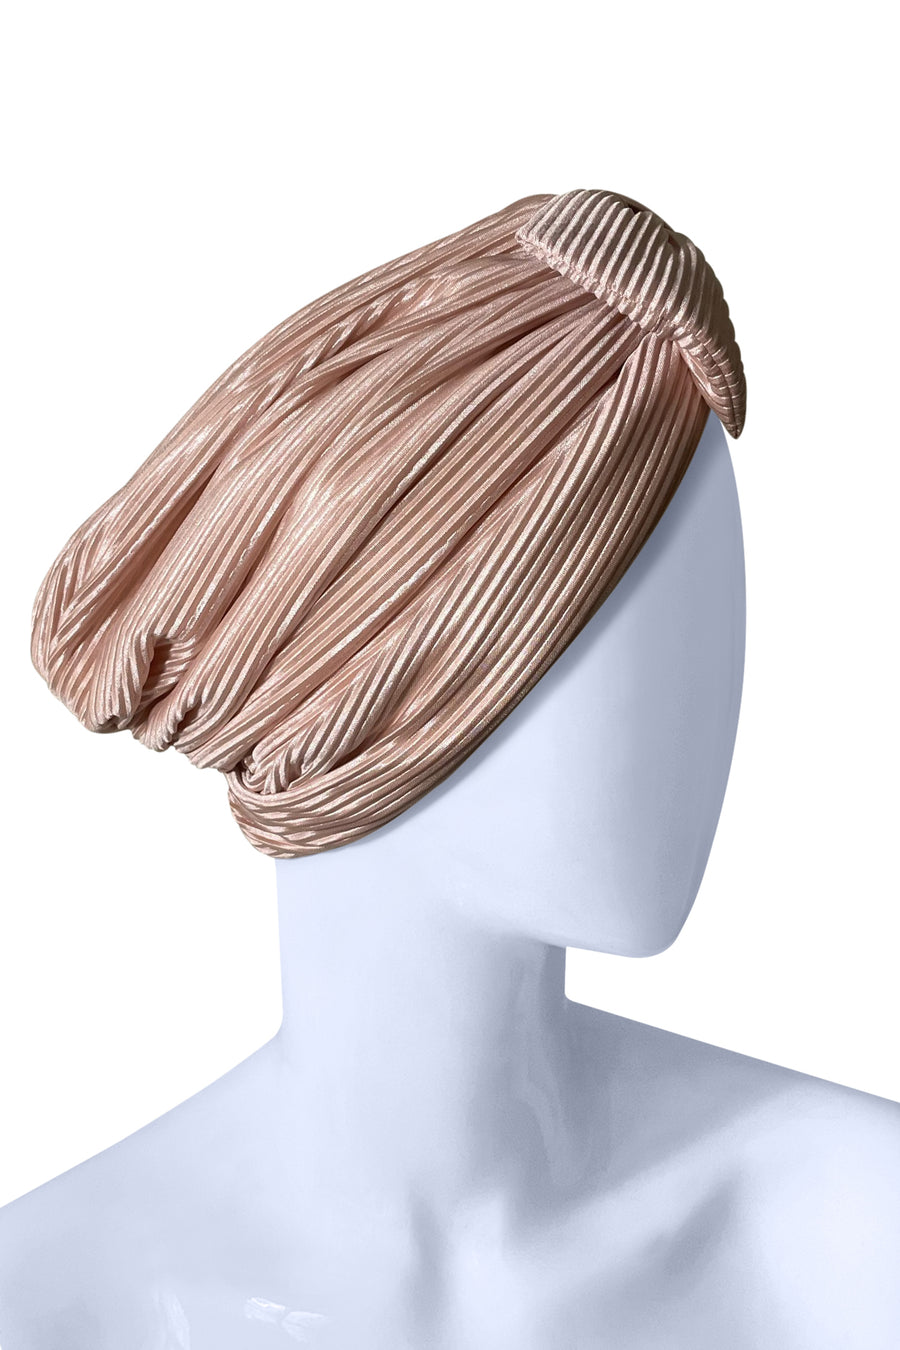 CONVENTION - NEW TURBAN WITH BOW !